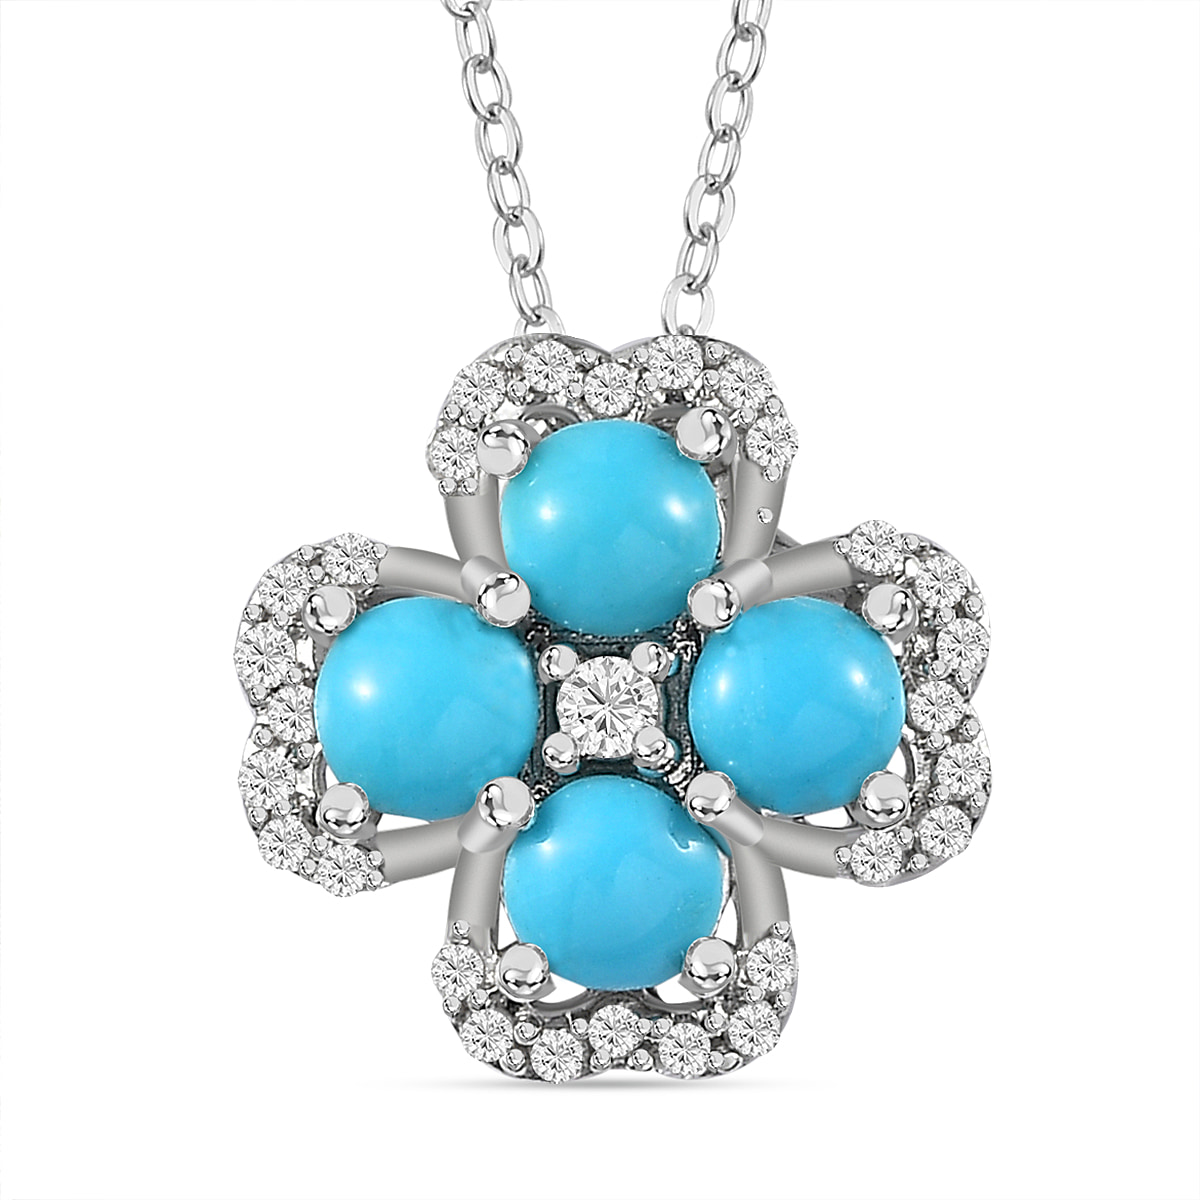 Arizona Sleeping Beauty Turquoise & Natural Zircon Floral Pendant with Chain (Size 20) in Platinum Overlay Sterling Silver 1.53 Ct